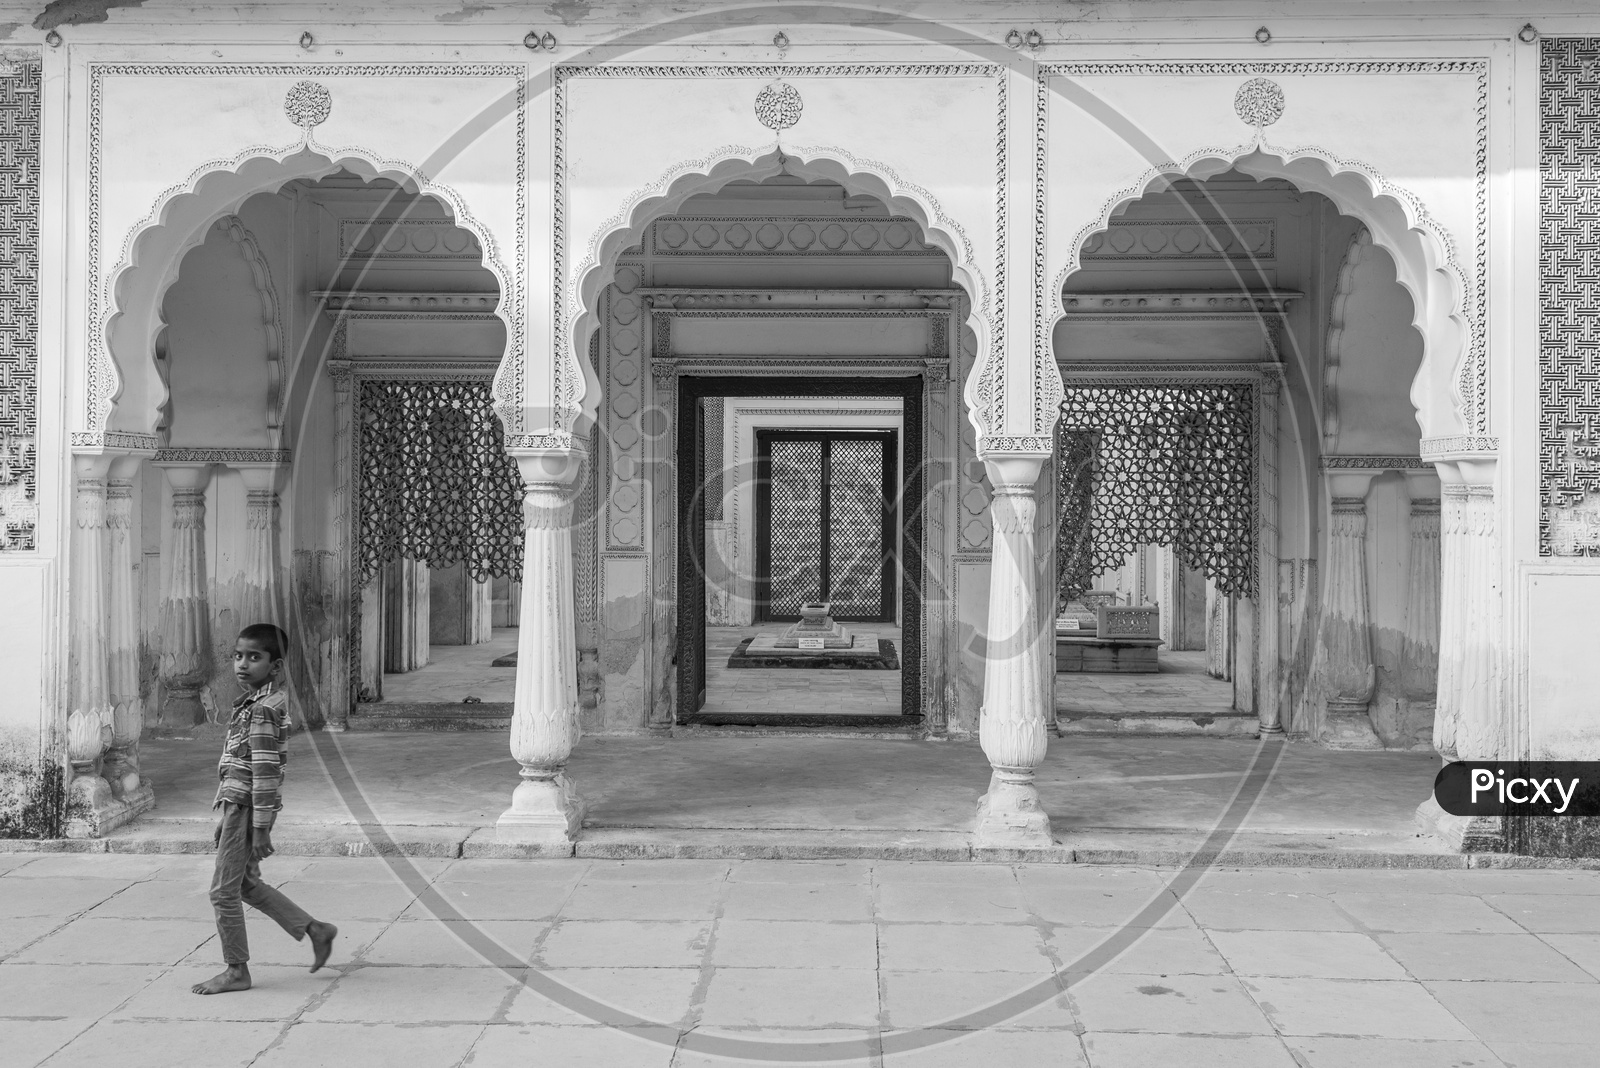 Child at Paigah Tombs, Hyderabad